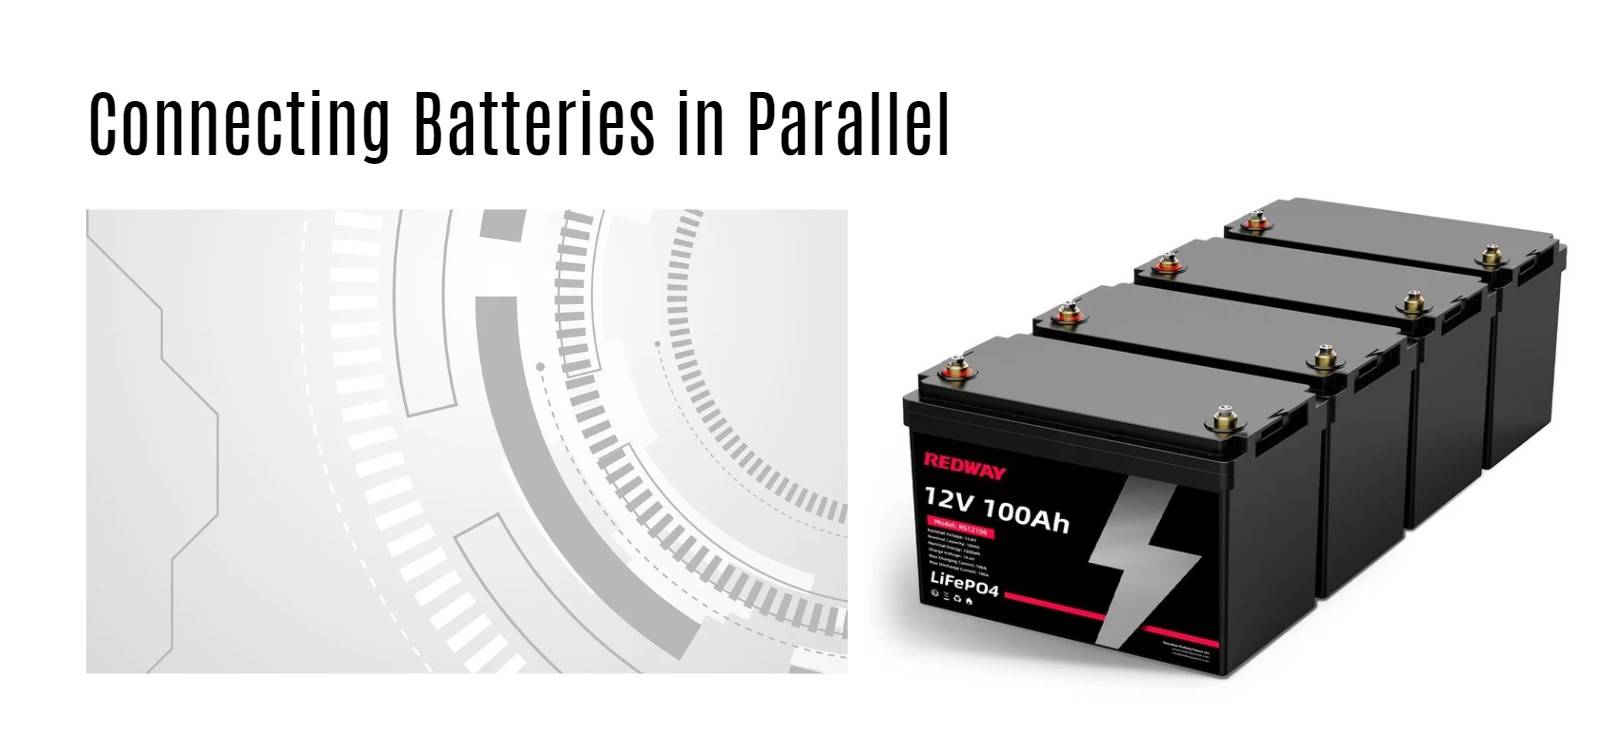 Connecting Batteries in Parallel 12v 100ah rv lithium battery factory oem manufacturer marine boat